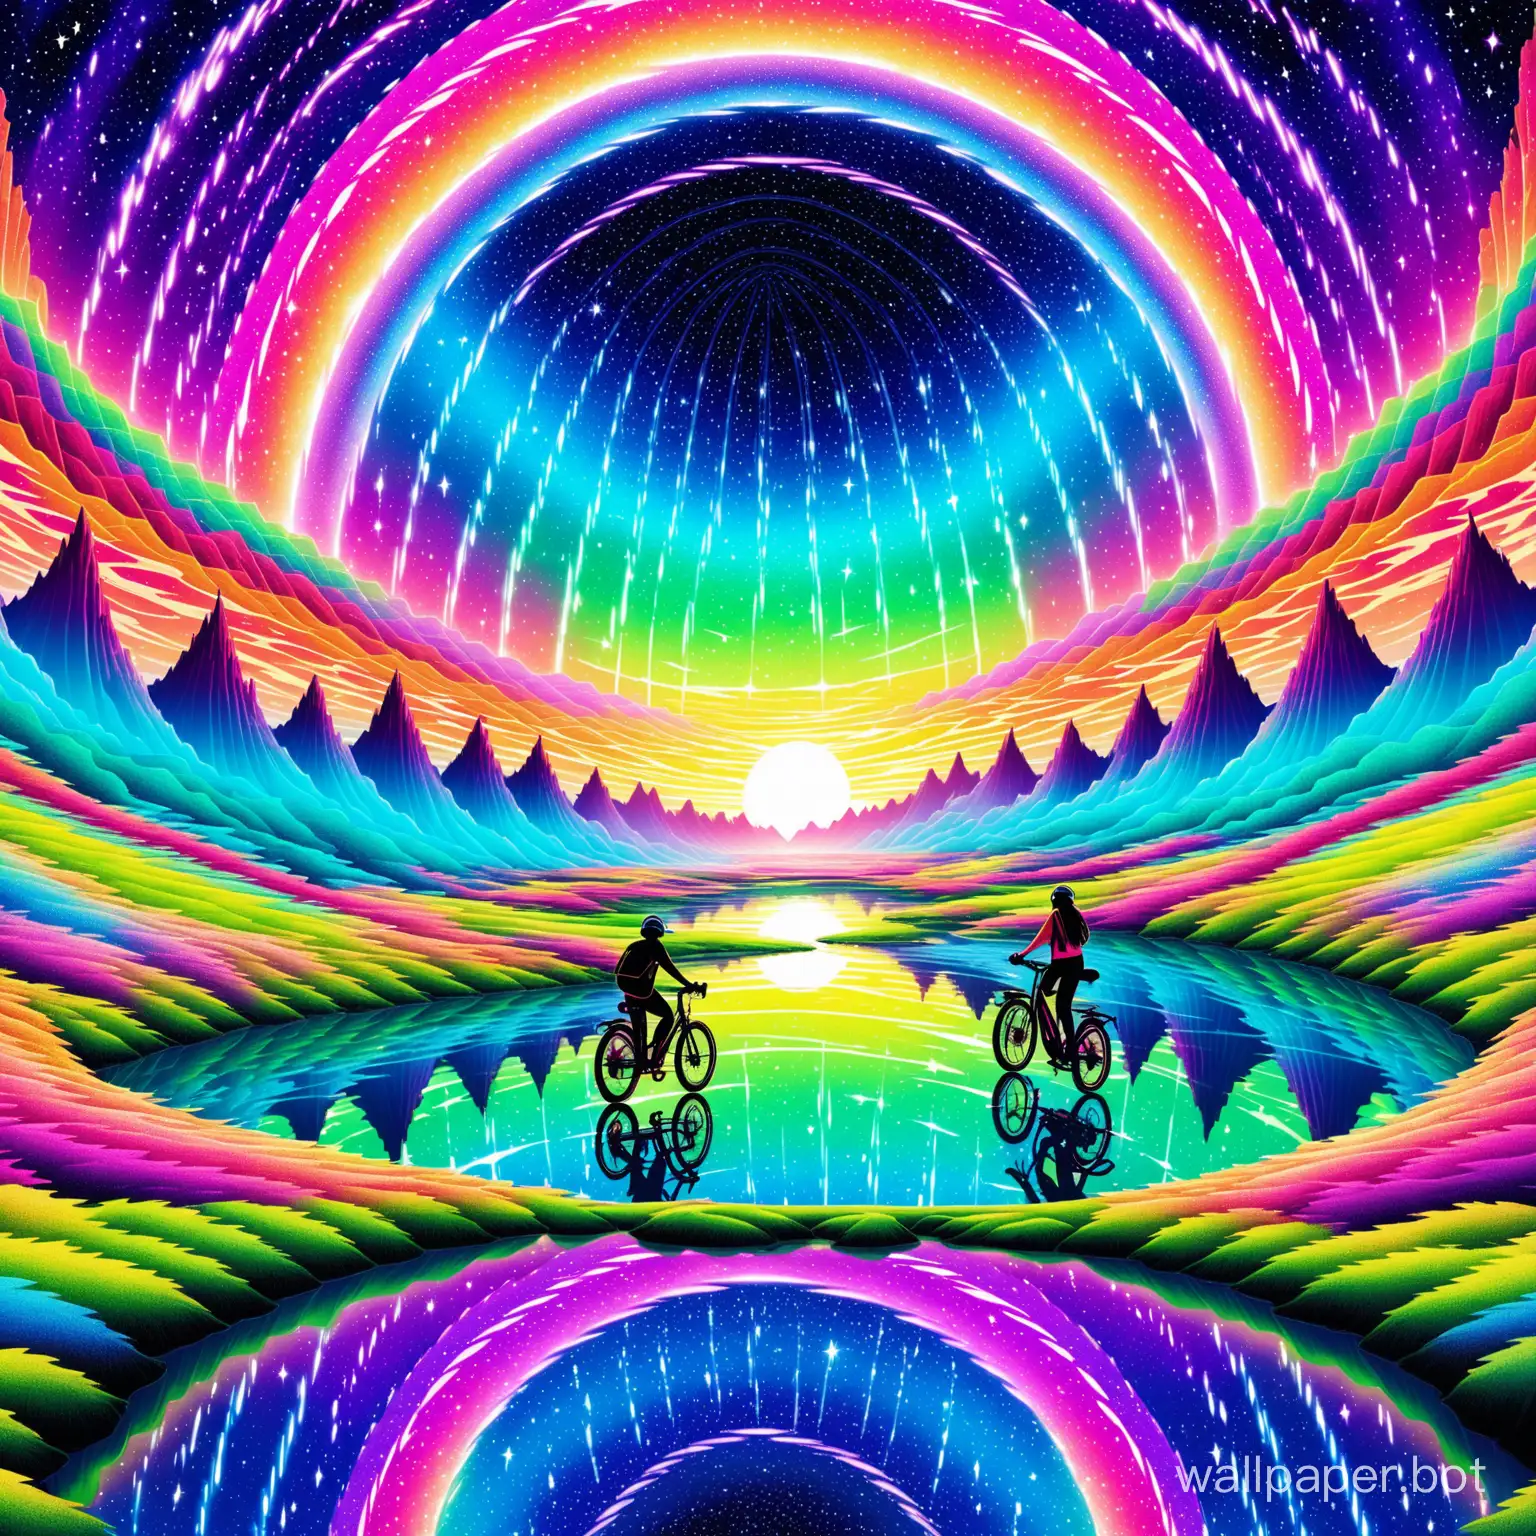 Psychedelic-Valley-Mirror-Mountains-and-Starry-Waterfall-with-Ebike